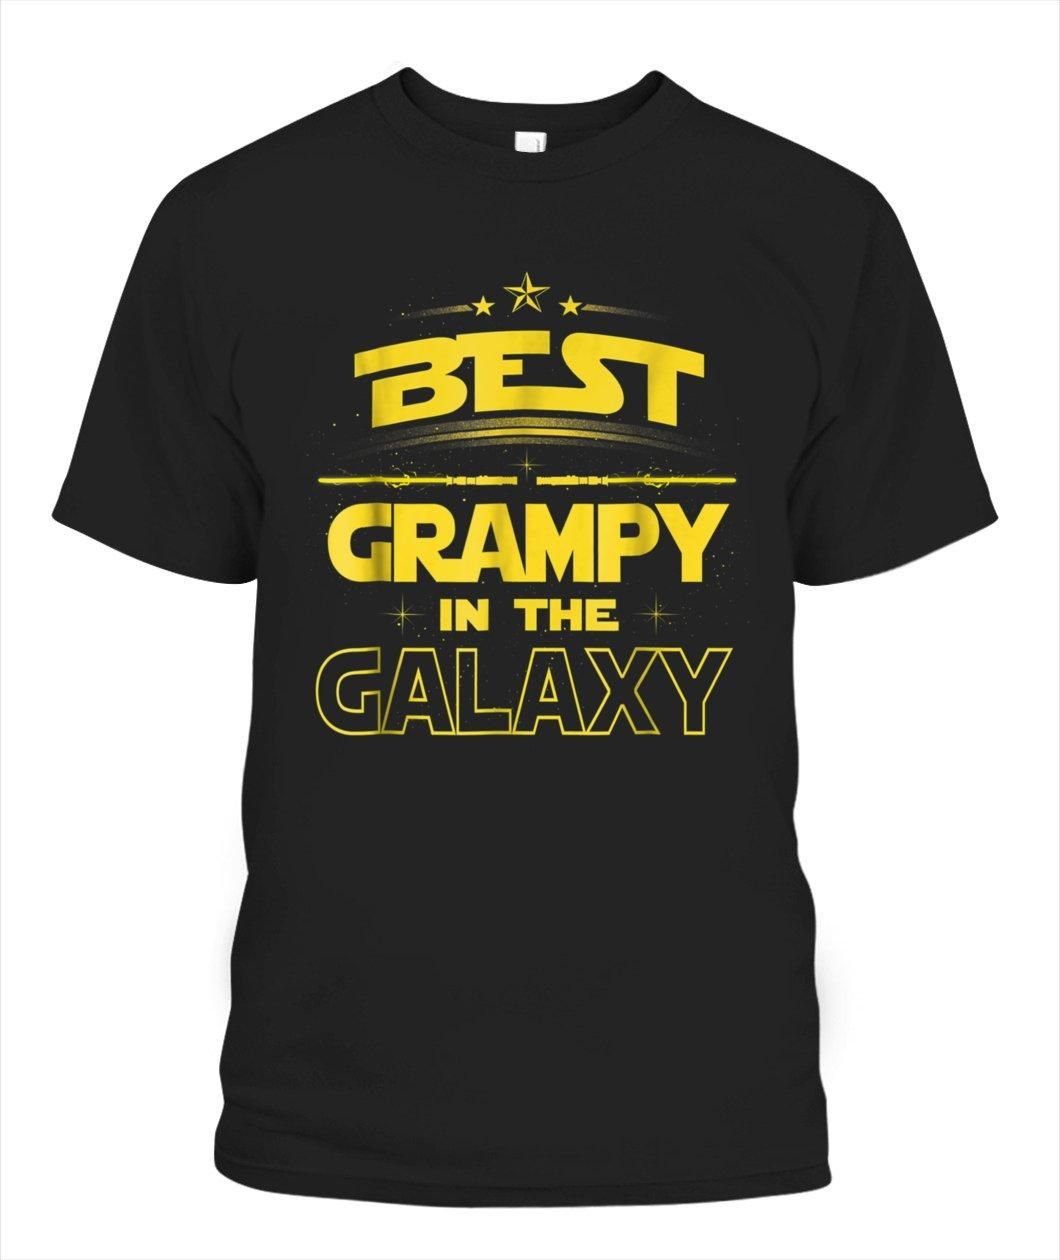 Best Grampy In The Galaxy Tee Shirt Fathers Day Gift Grampy Tee Shirt